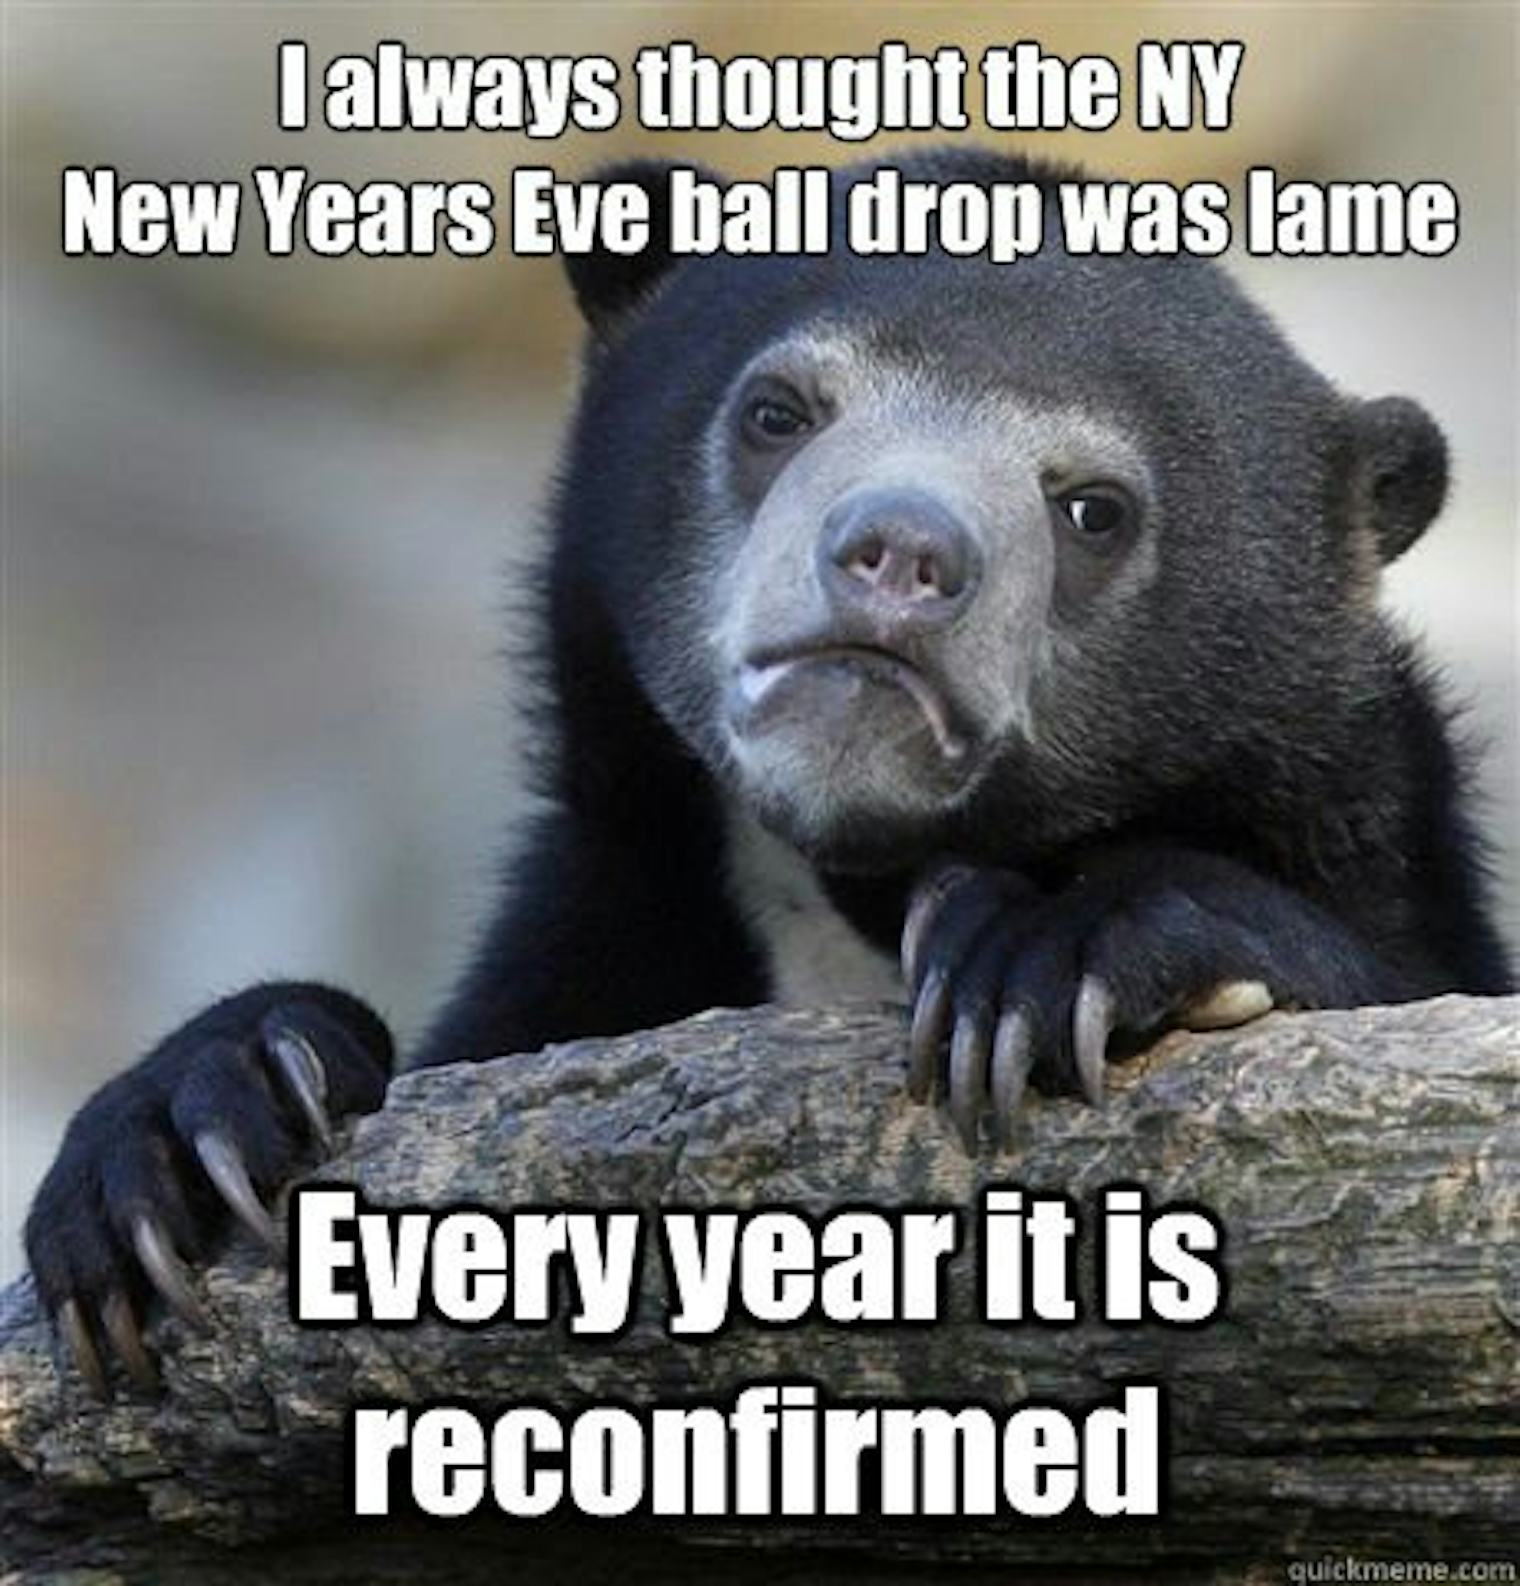 8 Funny New Year's Eve Memes To Keep You Laughing Into 2016